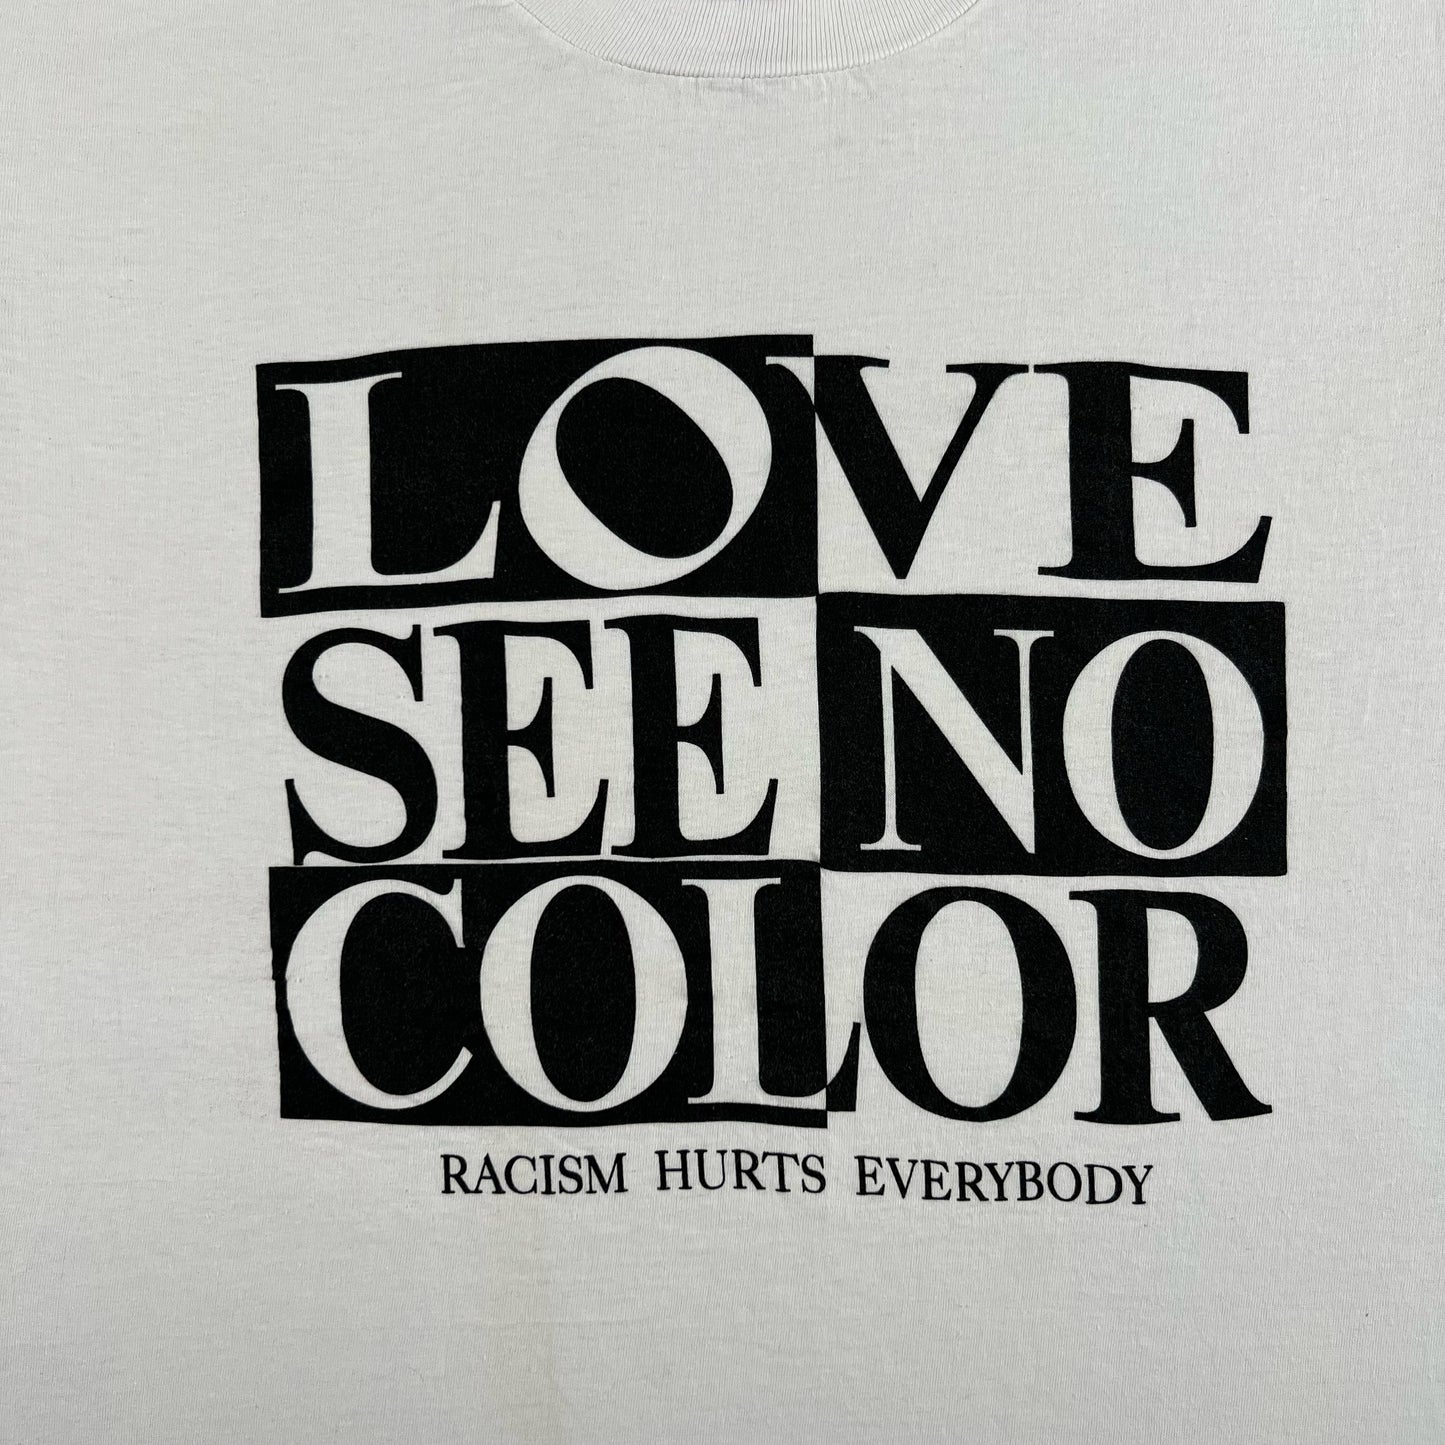 90s Love See No Color Tee- XL